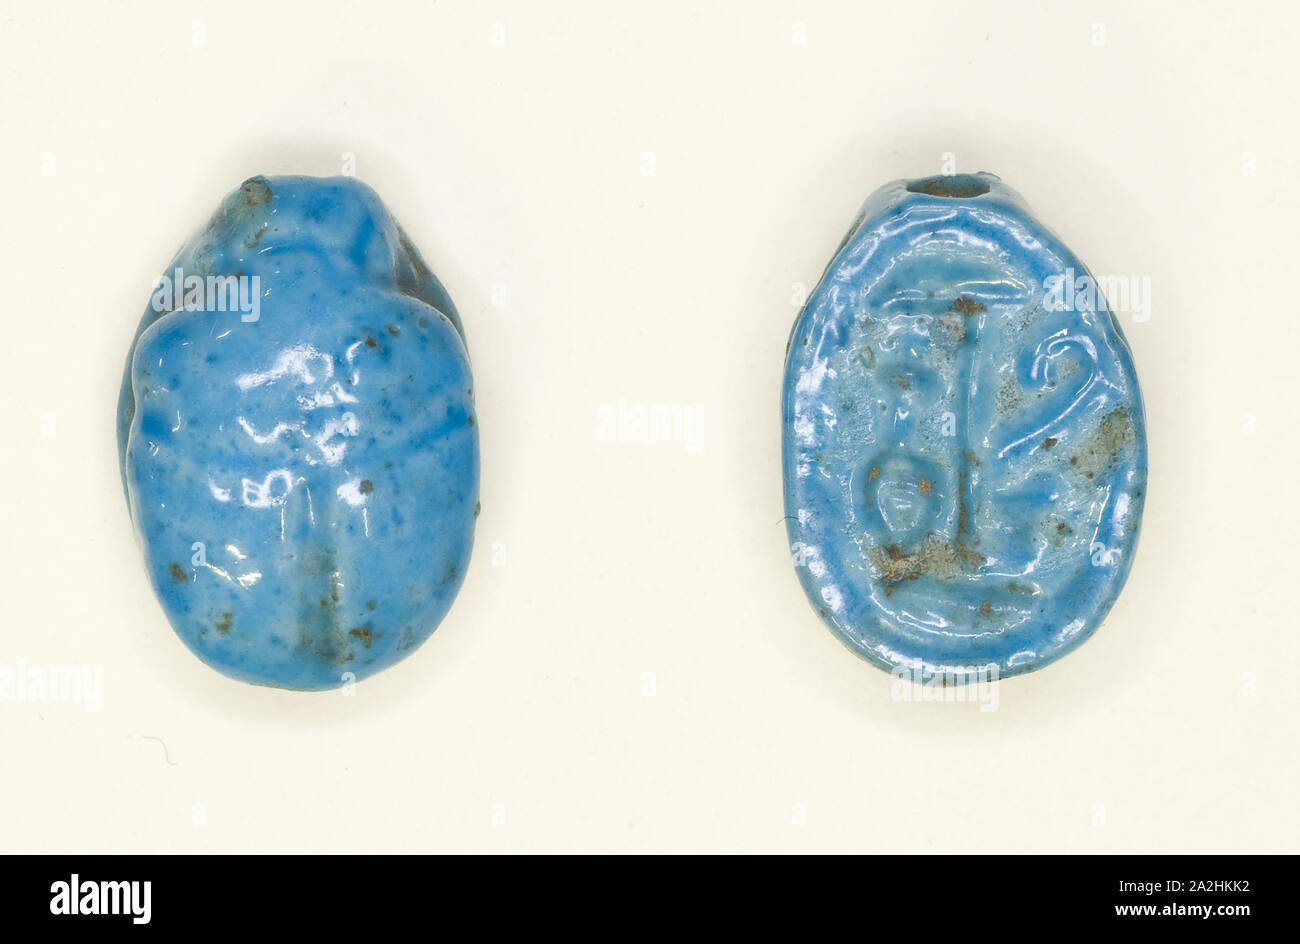 Scarab: Hieroglyphs (Red Crown, nfr- and nb-Signs: Trigramme of Amun), New Kingdom, Dynasties 18–19 (about 1550–1186 BC), Egyptian, Egypt, Faience, 1.3 × 1 × 0.6 cm (1/2 × 3/8 × 1/4 in Stock Photo